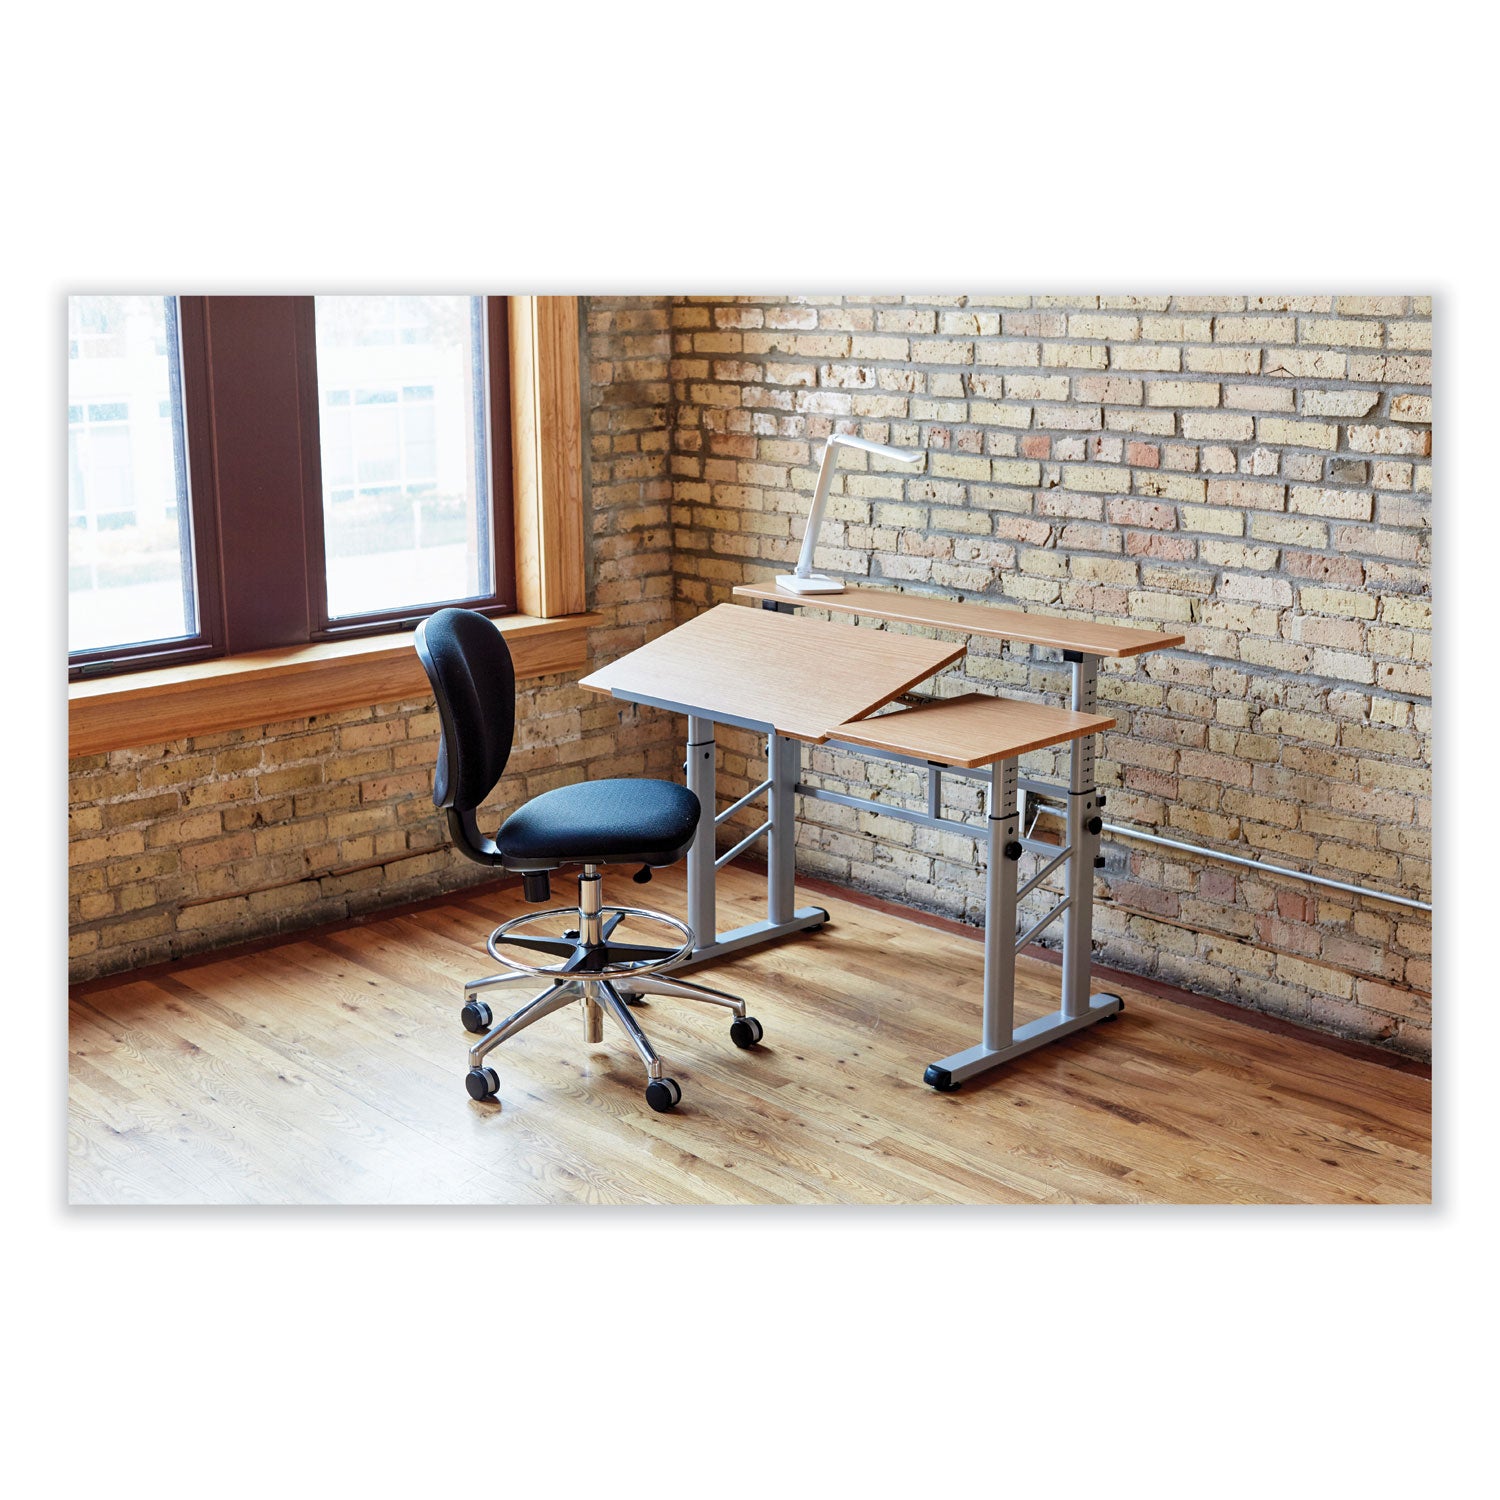 height-adjust-split-level-drafting-table-rectangular-square-4725x2975x26-to-3725-medium-oak-ships-in-1-3-business-days_saf3965mo - 6